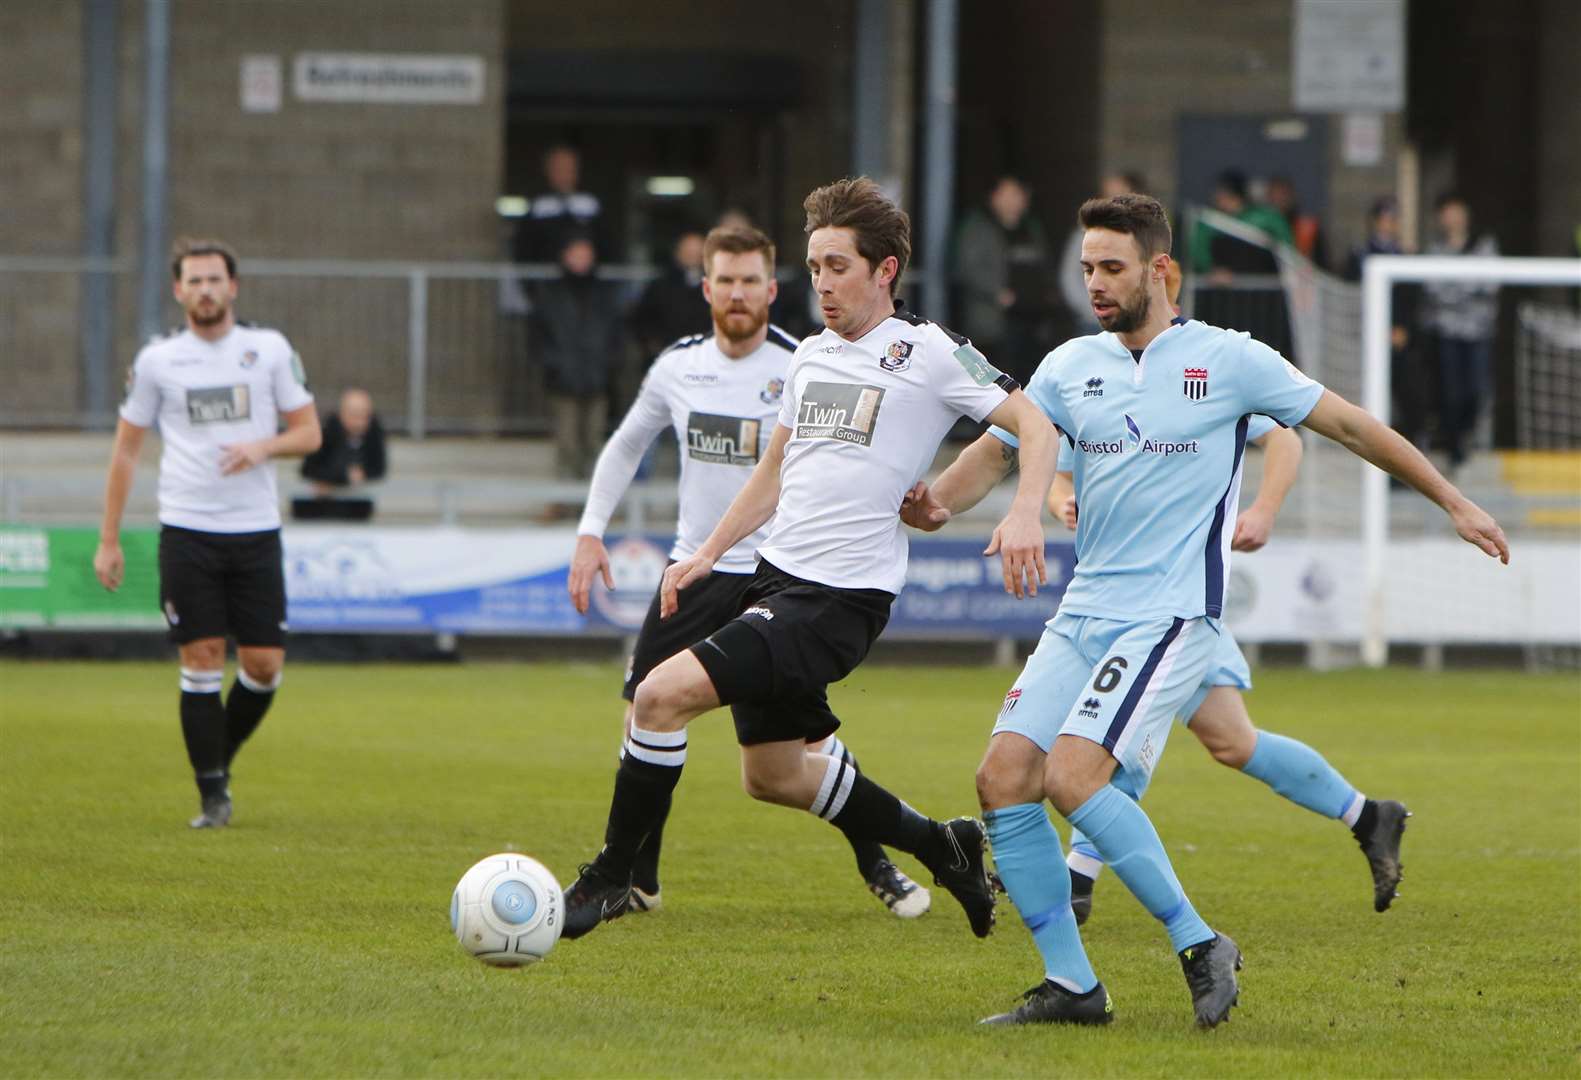 Dartford beat Bath 3-0 in their last home game Picture: Andy Jones